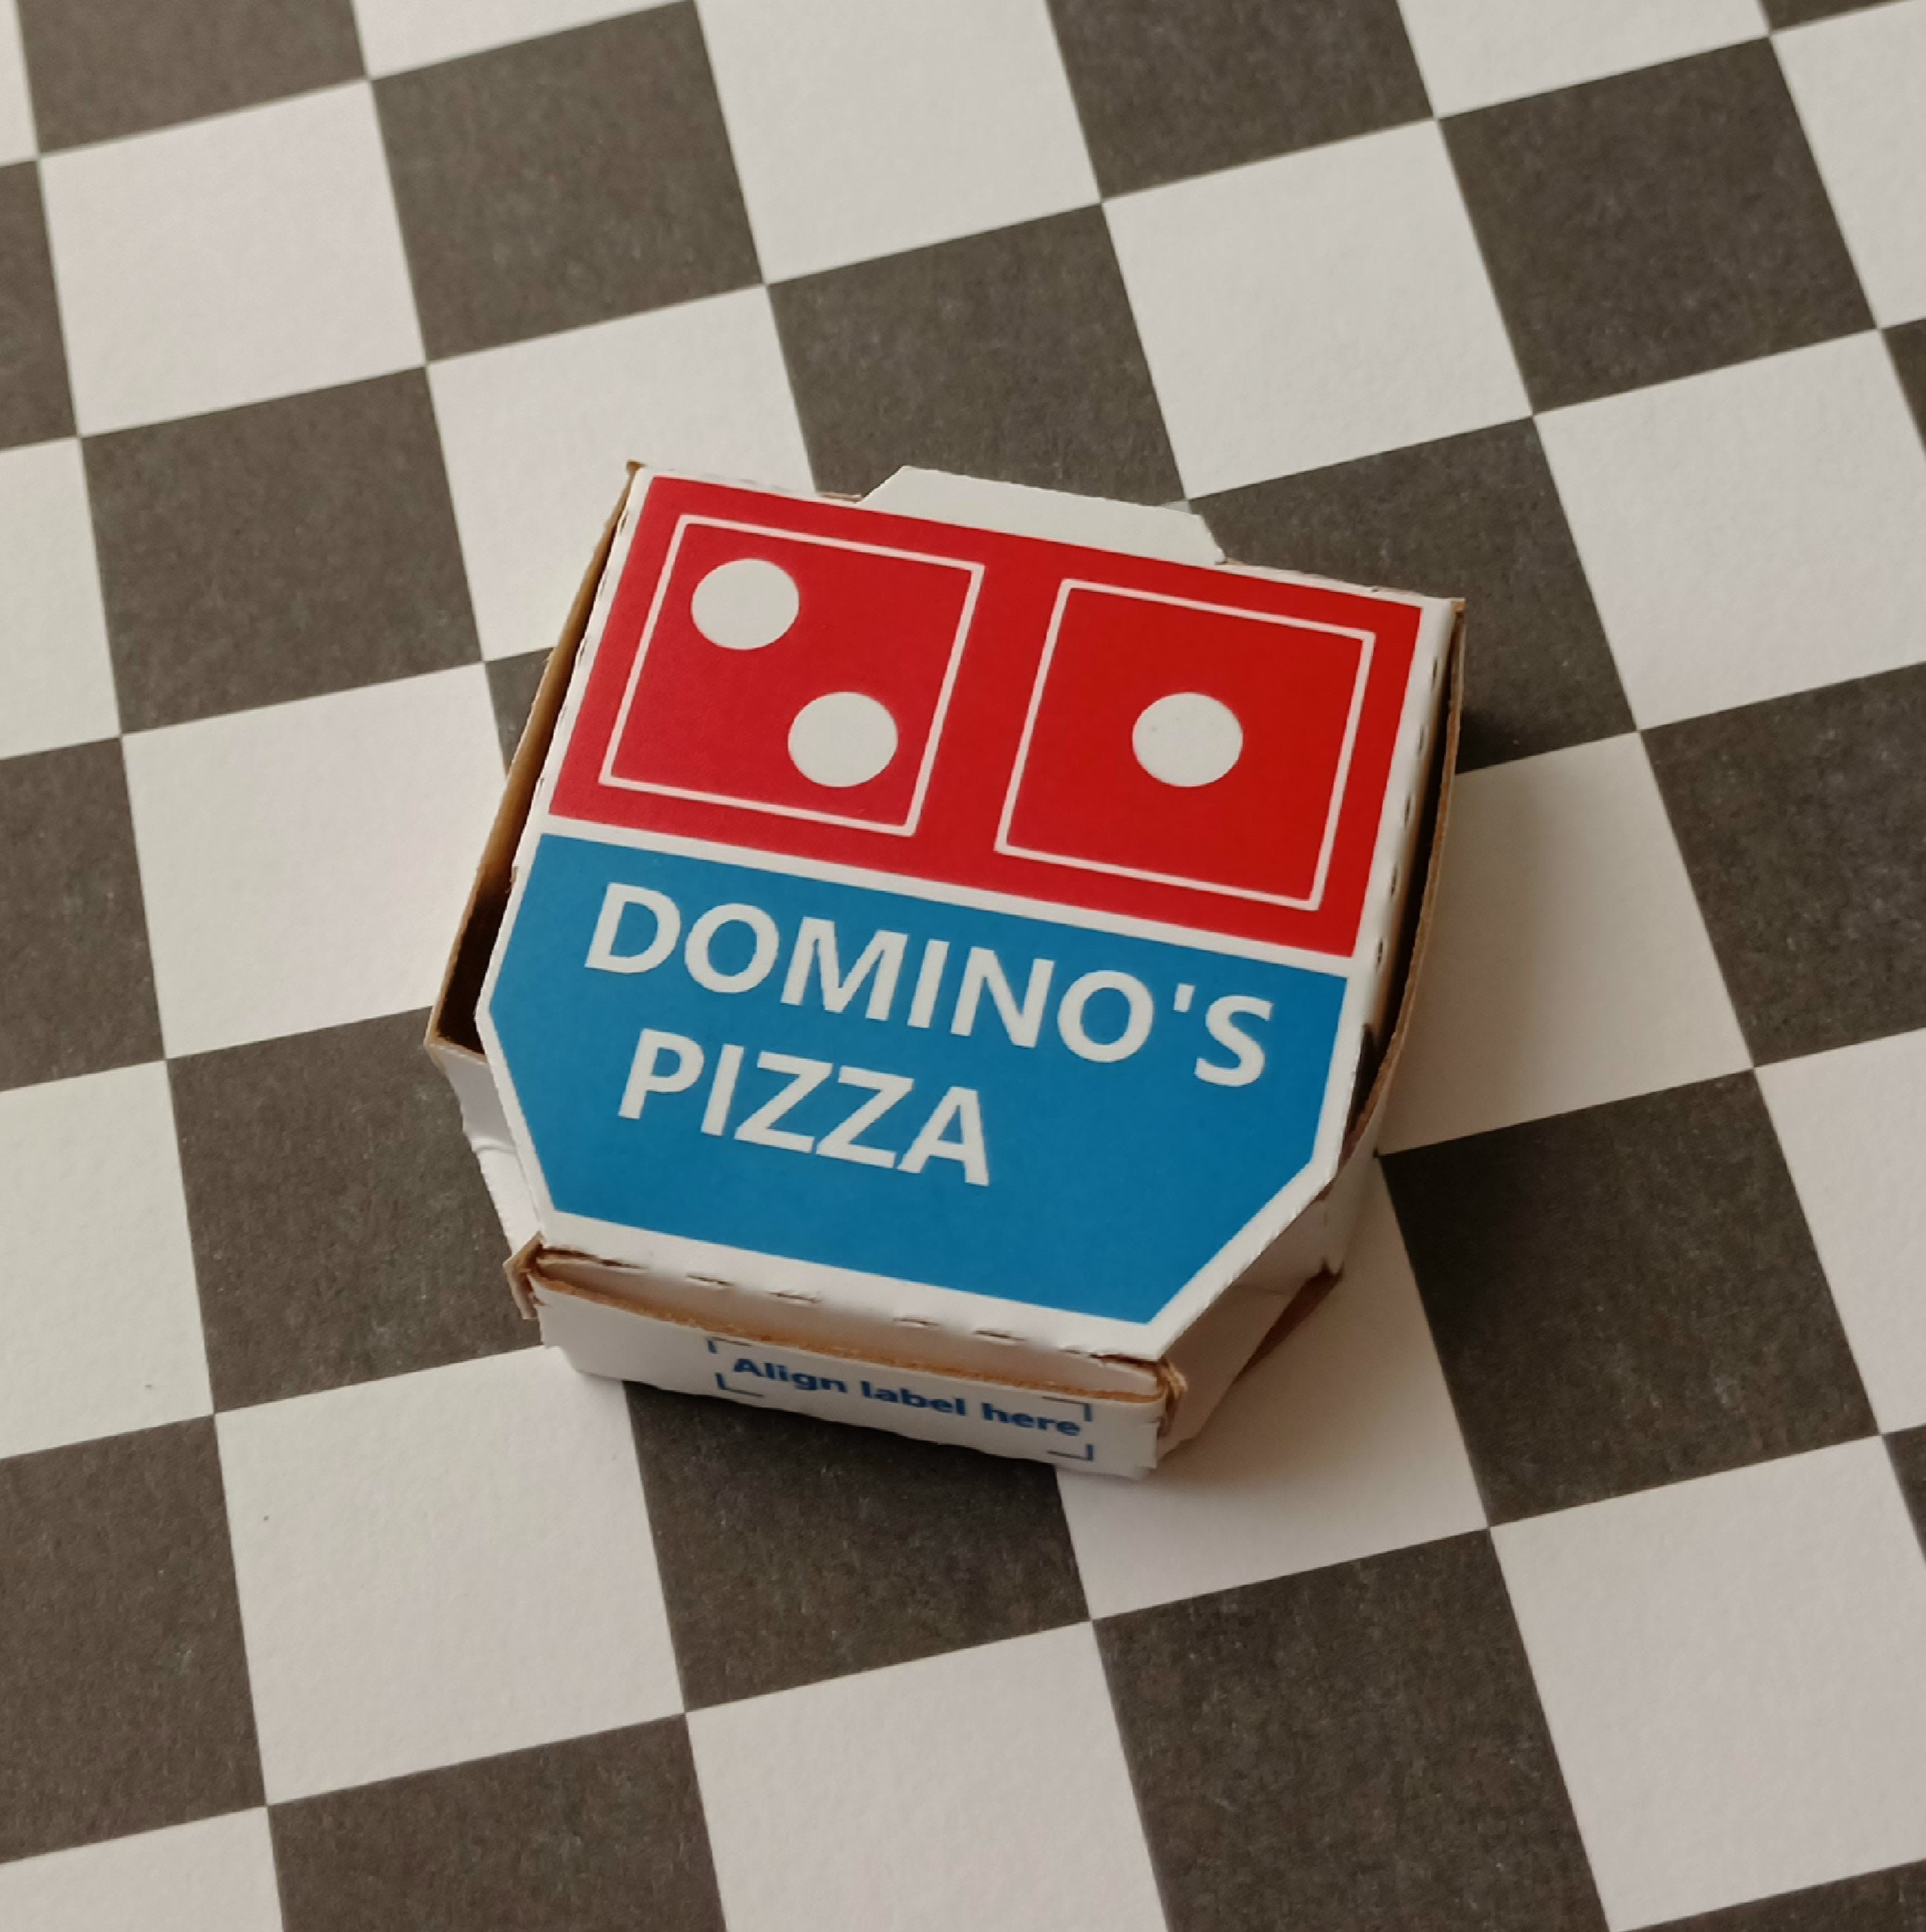 File:Domino's Pizza box from South Africa.jpg - Wikimedia Commons